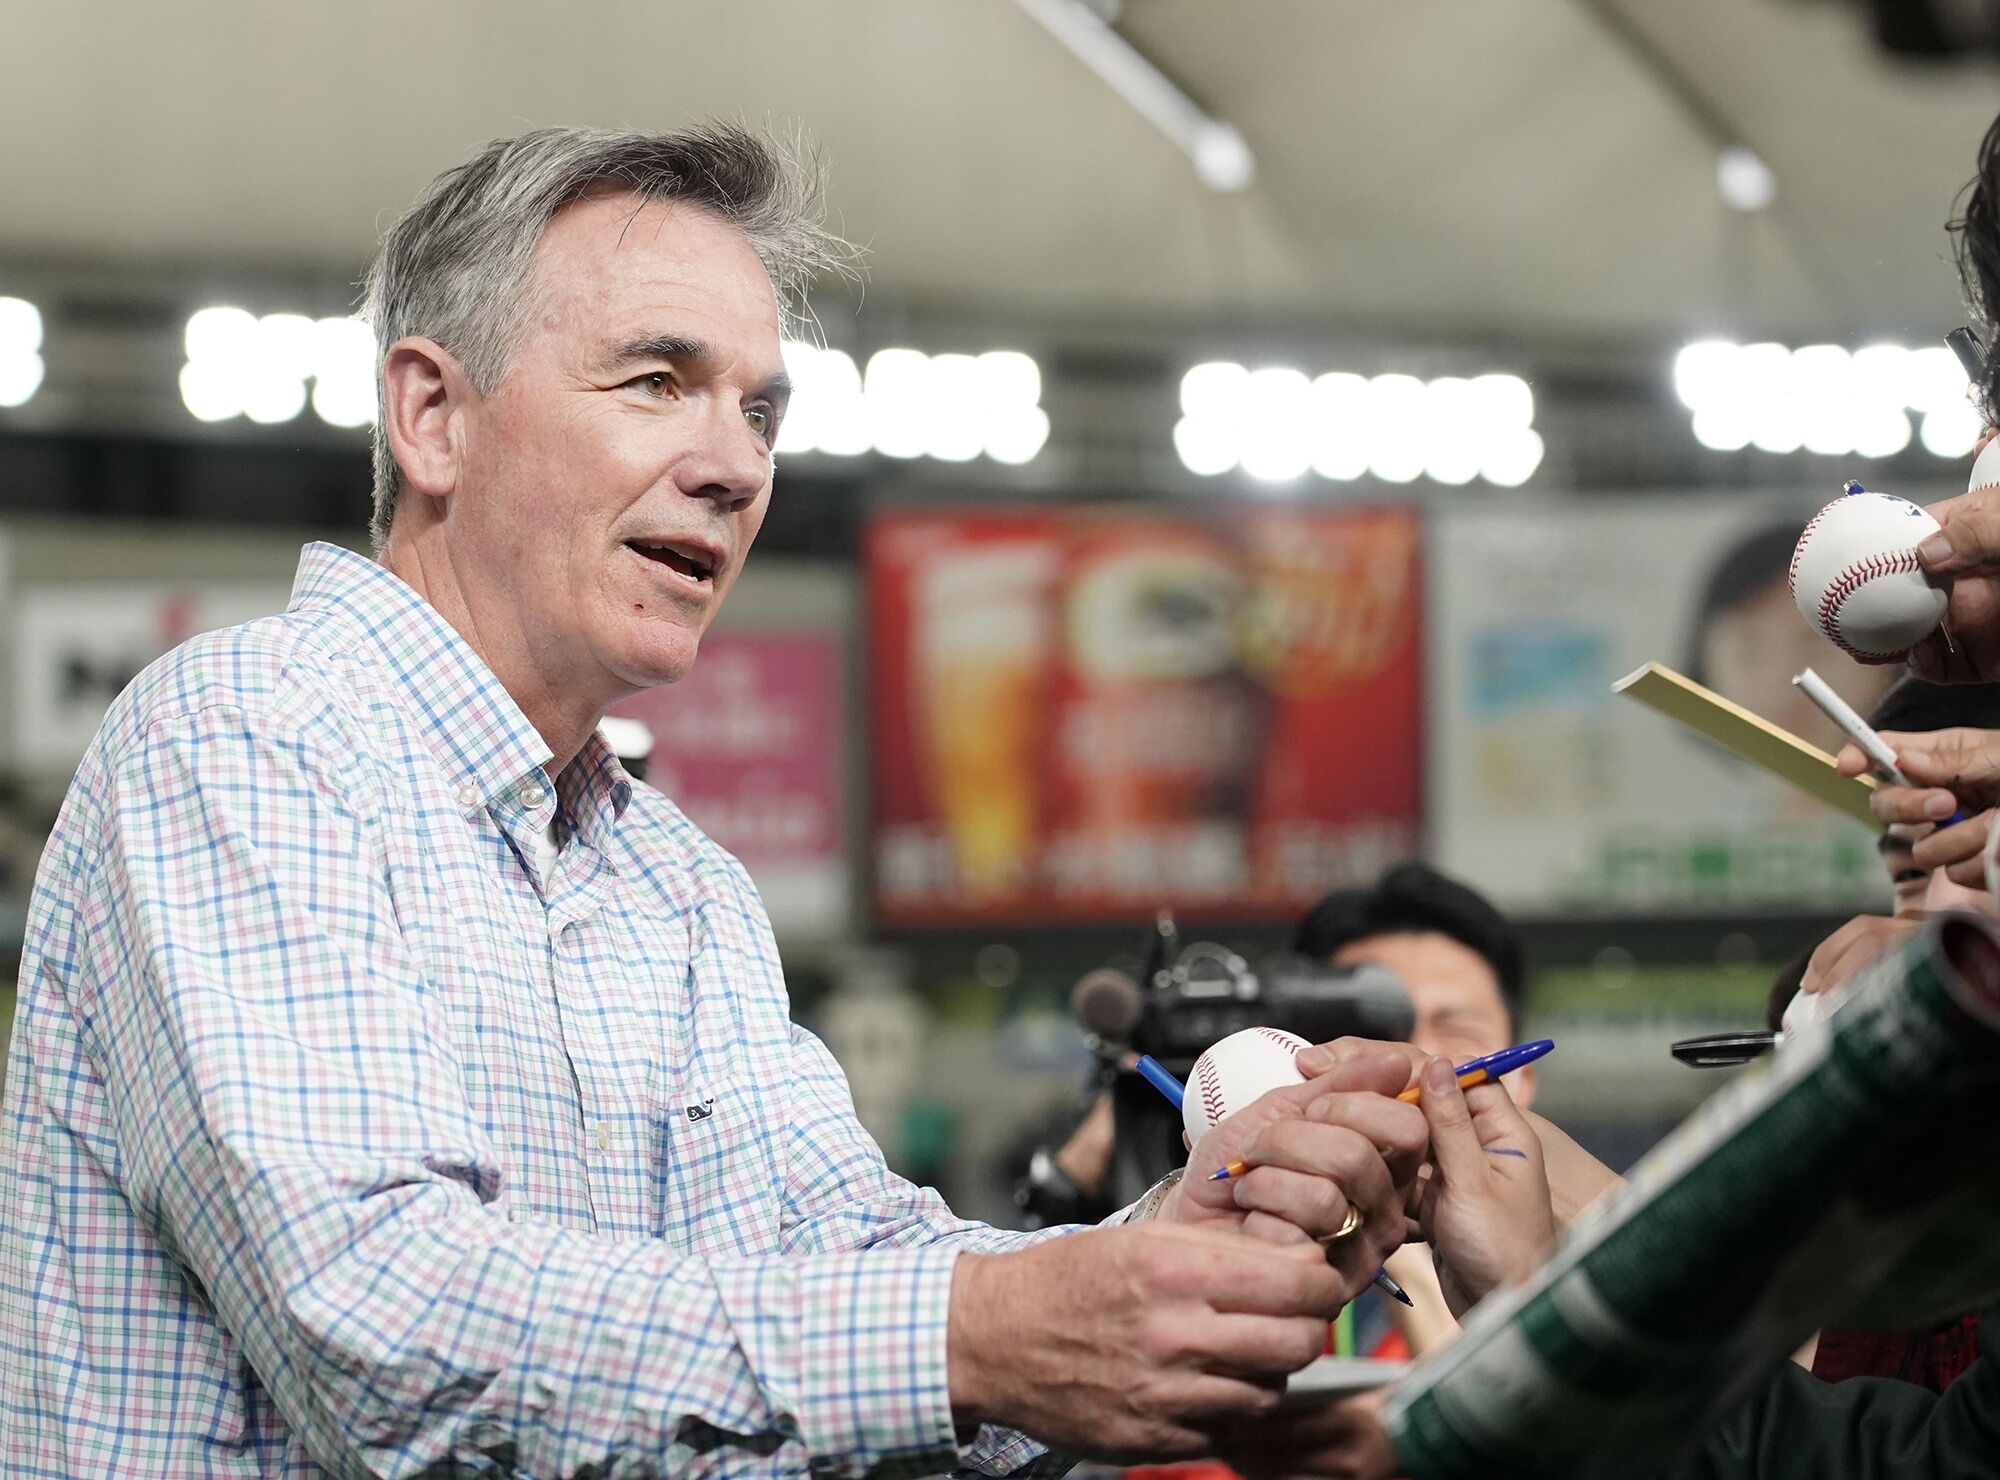 No stats can measure how much Billy Beane, on the cusp of venture